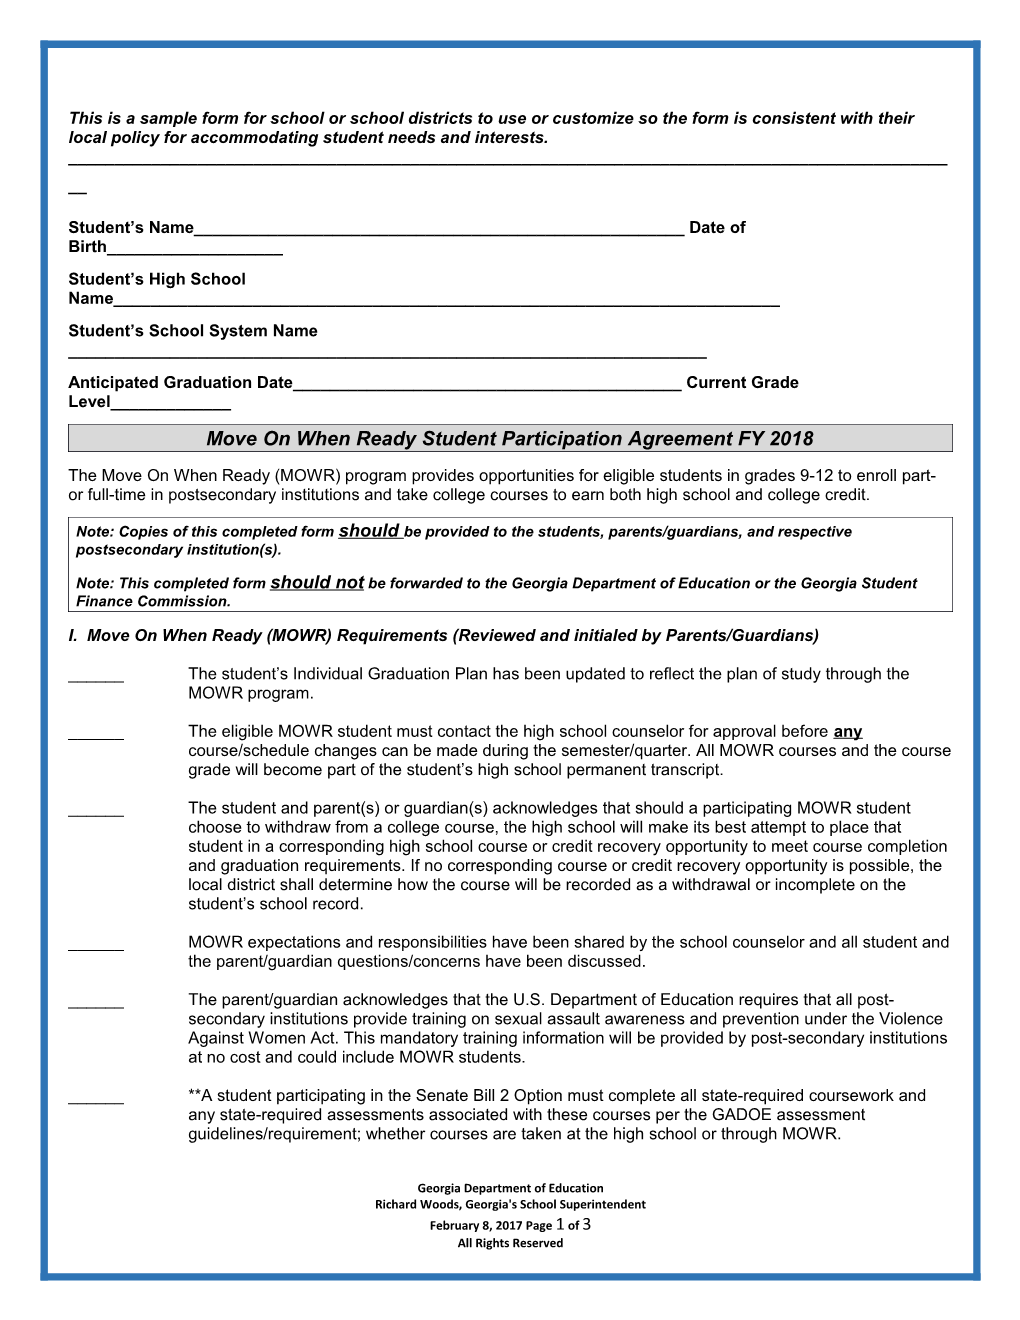 This Is a Sample Form for School Or School Districts to Use Or Customize So the Form Is